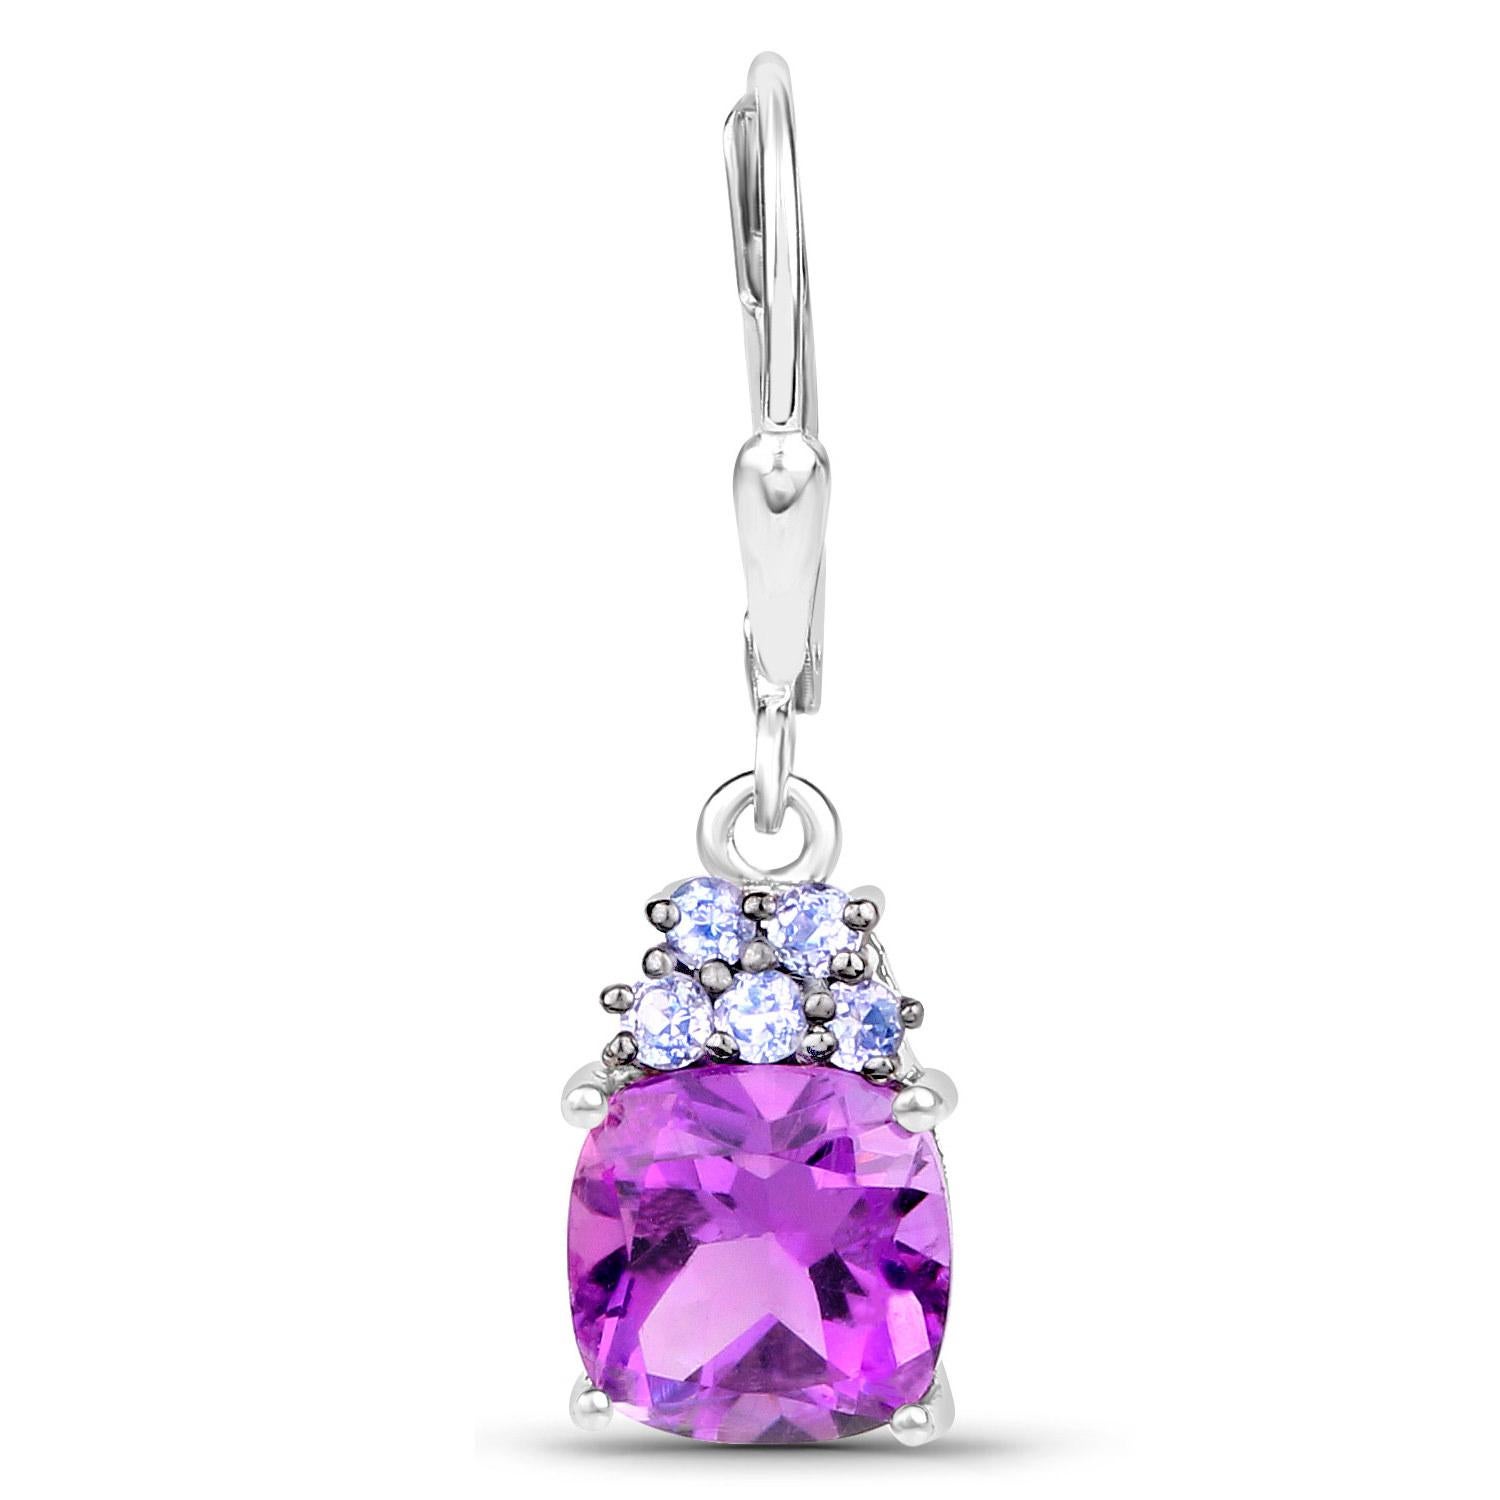 Cushion Cut Amethyst Dangle Earrings With Tanzanites 4 Carats Rhodium Plated Sterling Silver For Sale